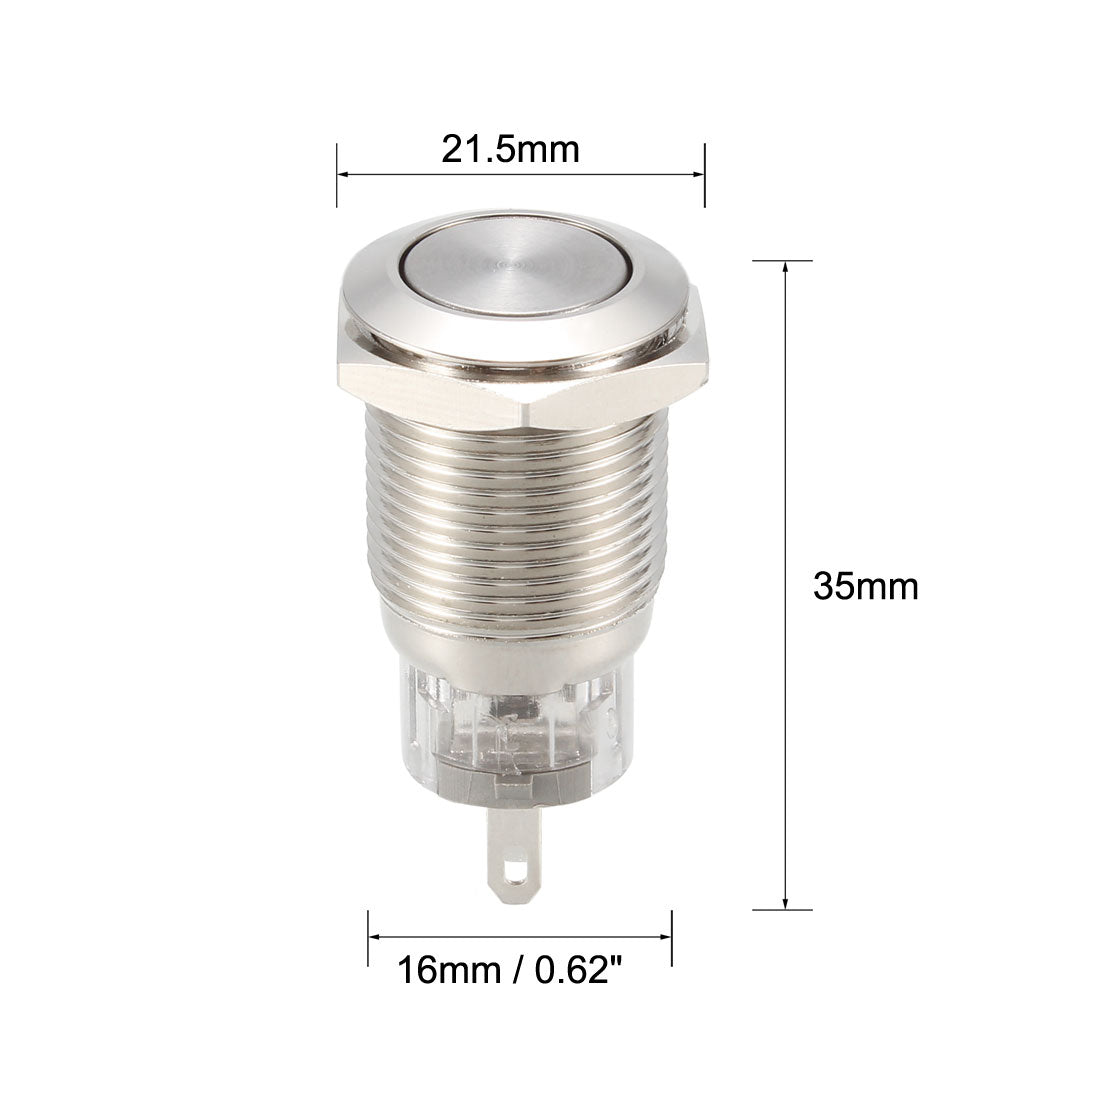 uxcell Uxcell Latching Metal Push Button Switch Flat Head 16mm Mounting NC NO COM AC 250V 5A  with Socket Plug Flat Type